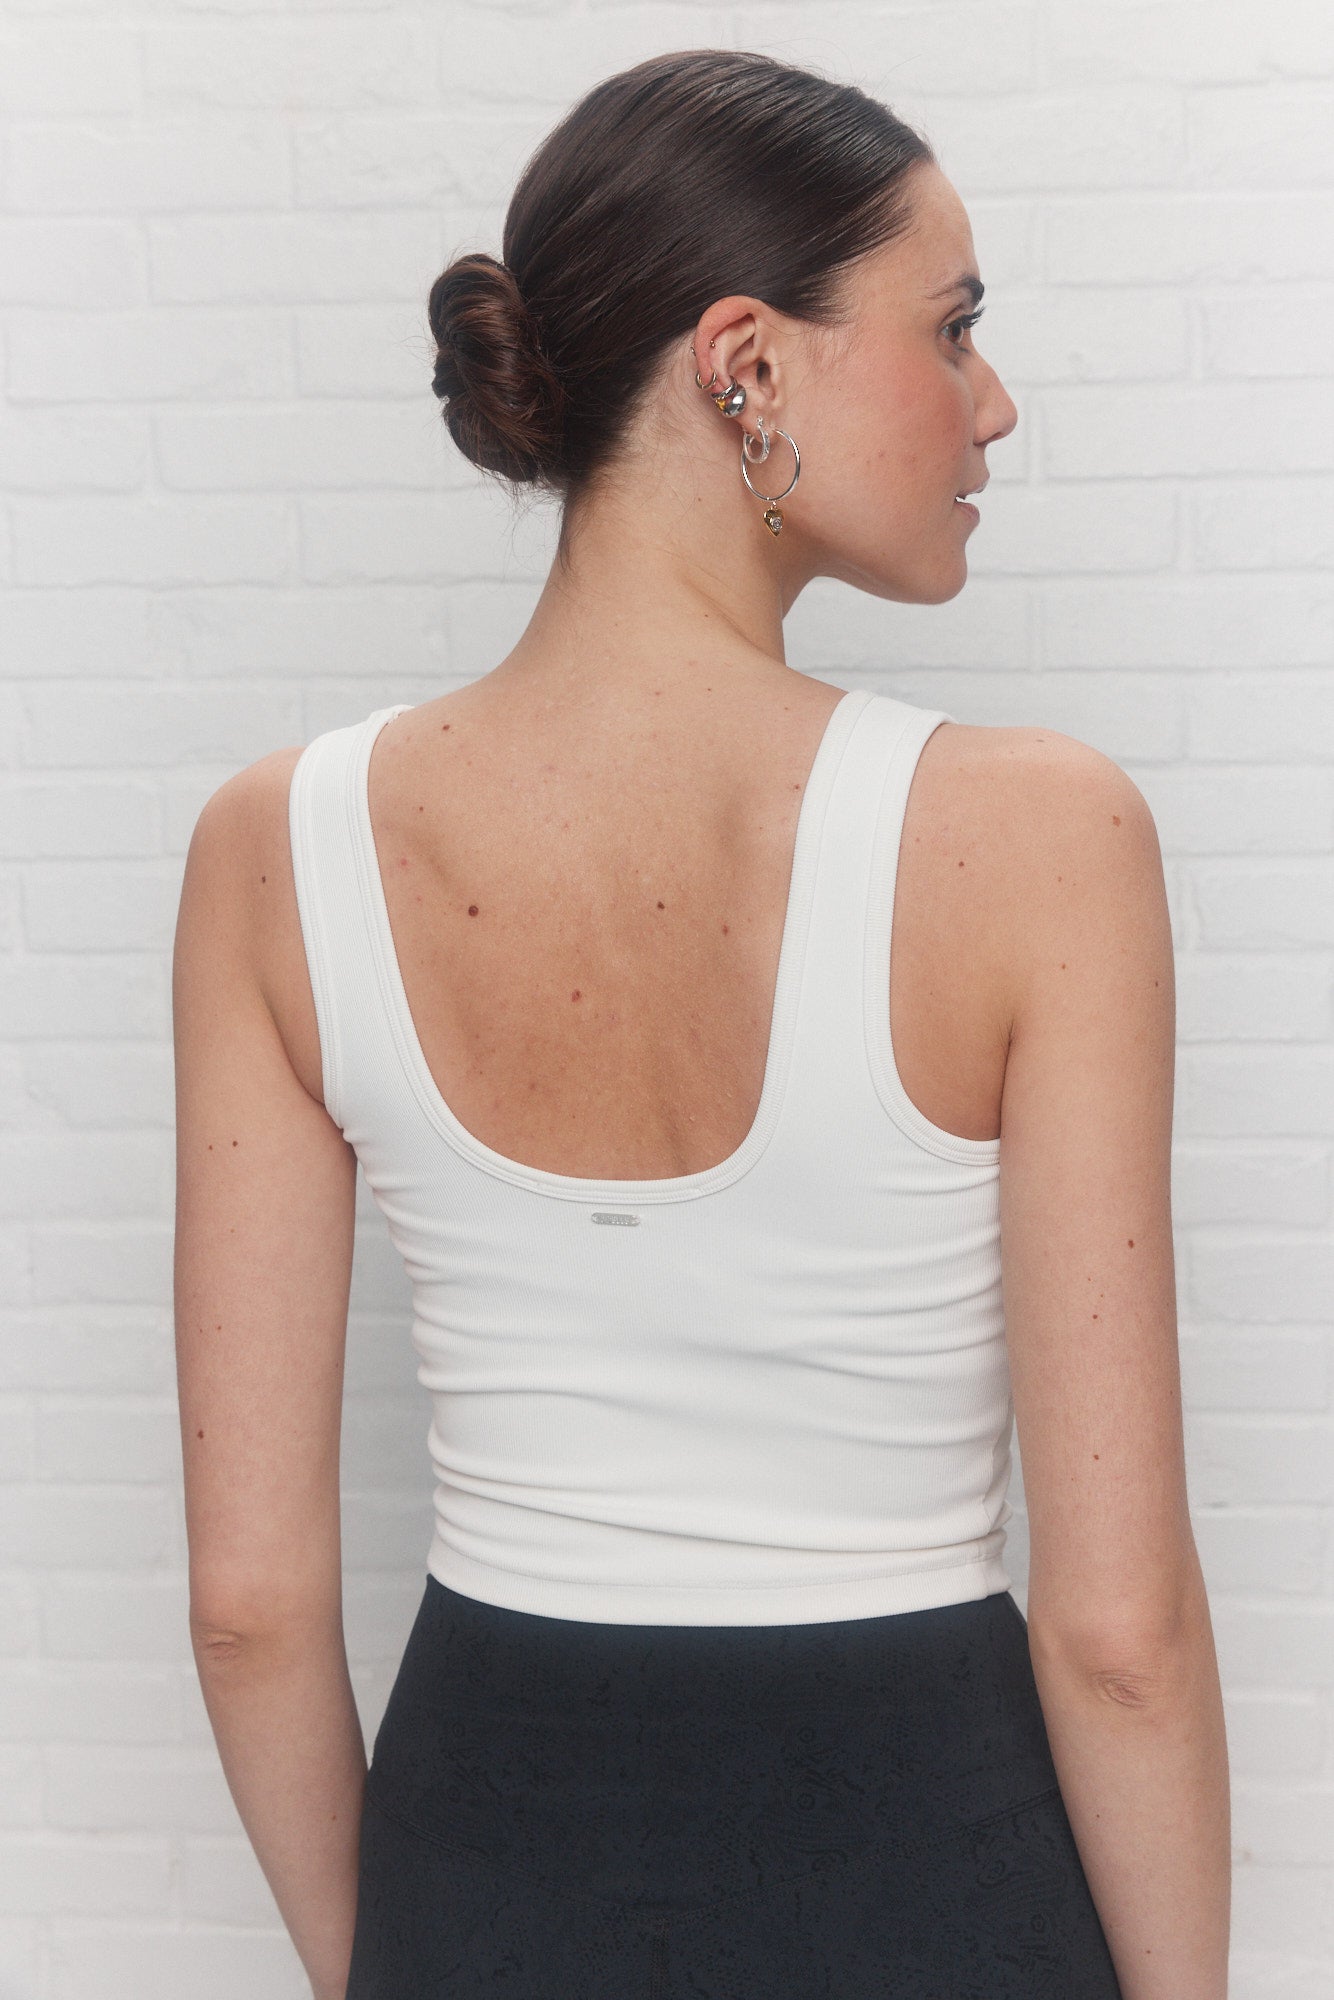 Textured white lounge camisole | Truly